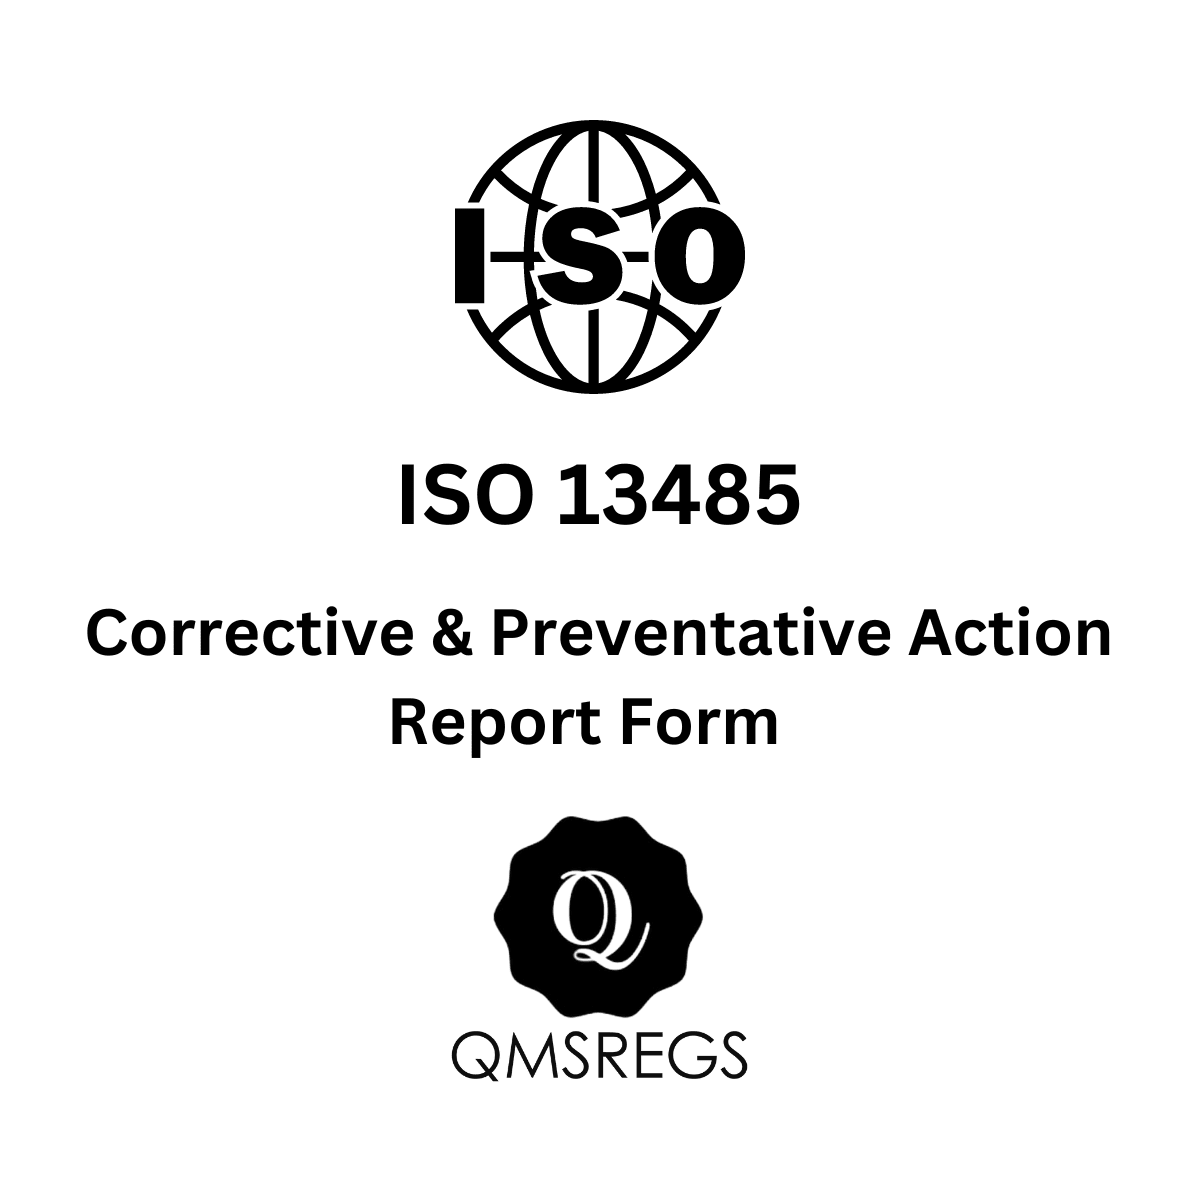 ISO 13485 Corrective and Preventative Action (CAPA) Report Form Template